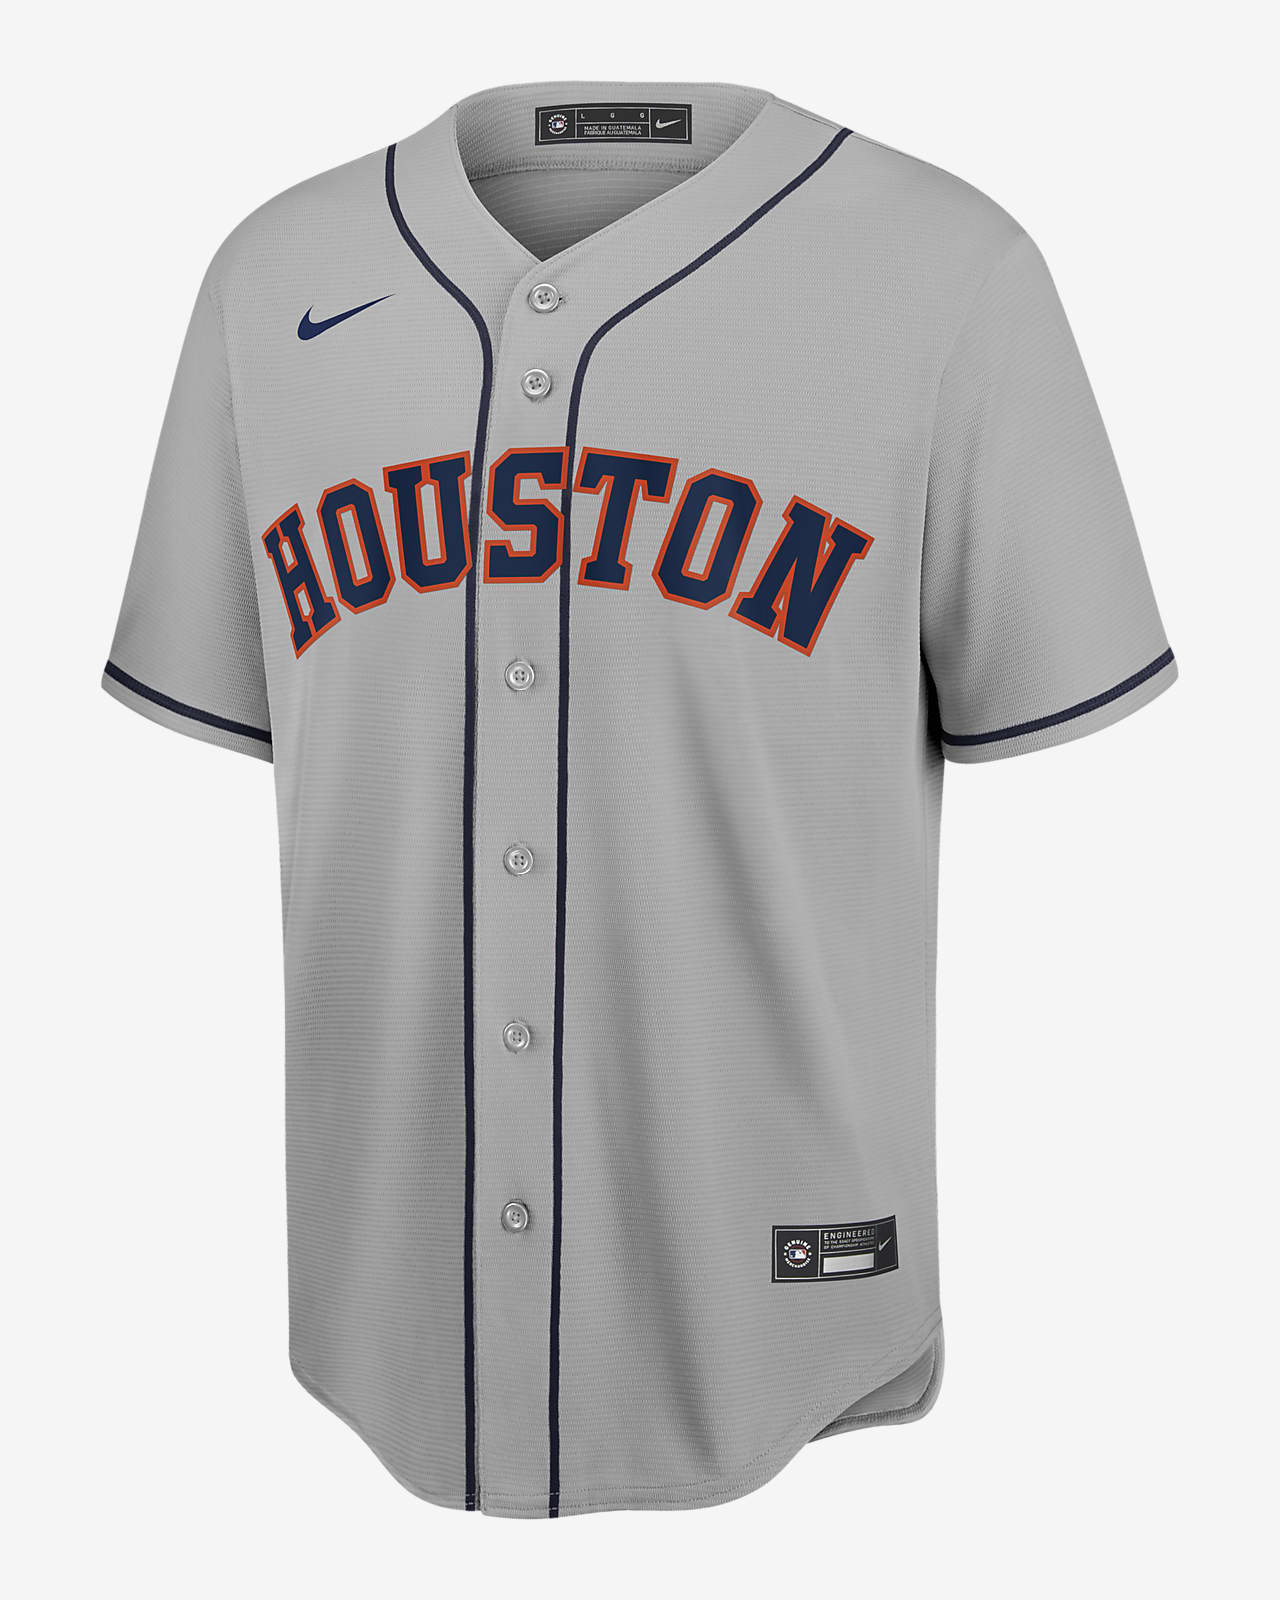 official houston astros jersey